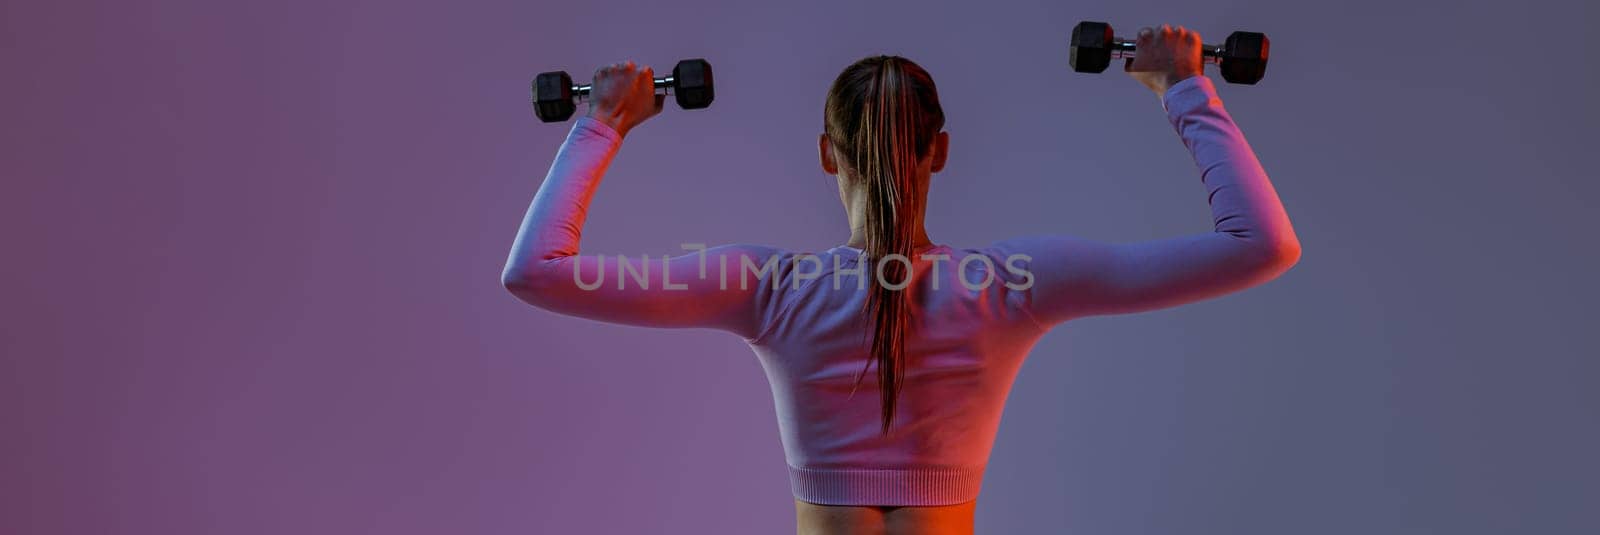 Back view of fitness woman doing exercises with dumbbells on studio background with color filter by Yaroslav_astakhov